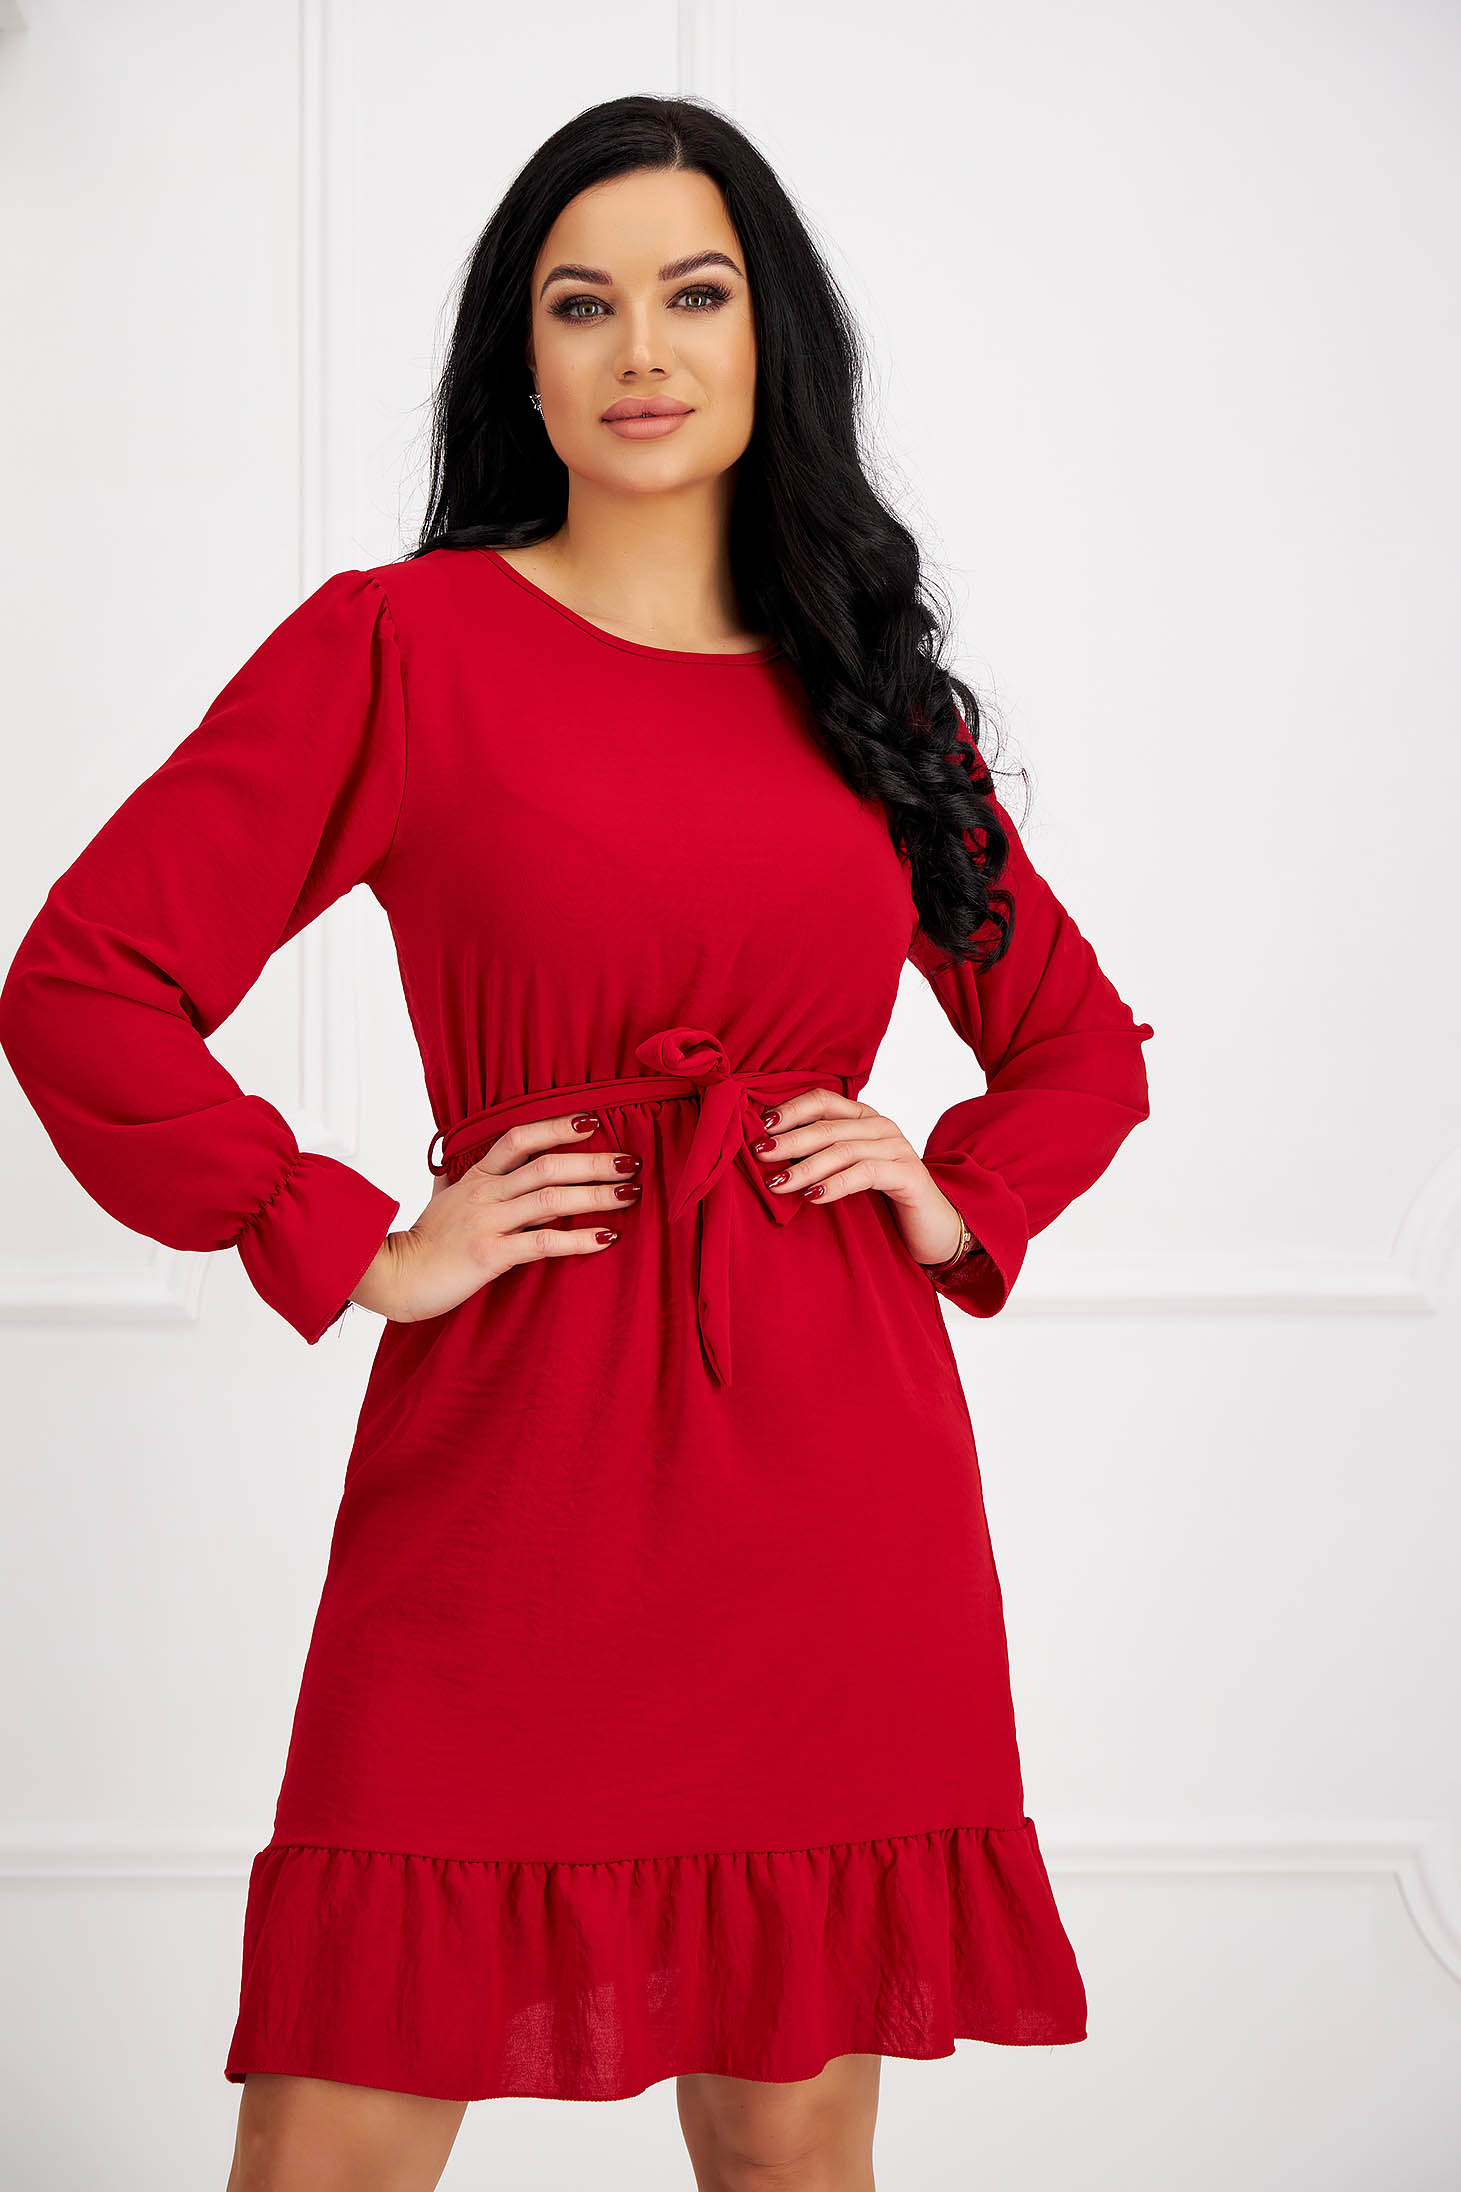 Red Georgette Dress in Flared Style with Elastic Waist and Detachable Belt - Lady Pandora